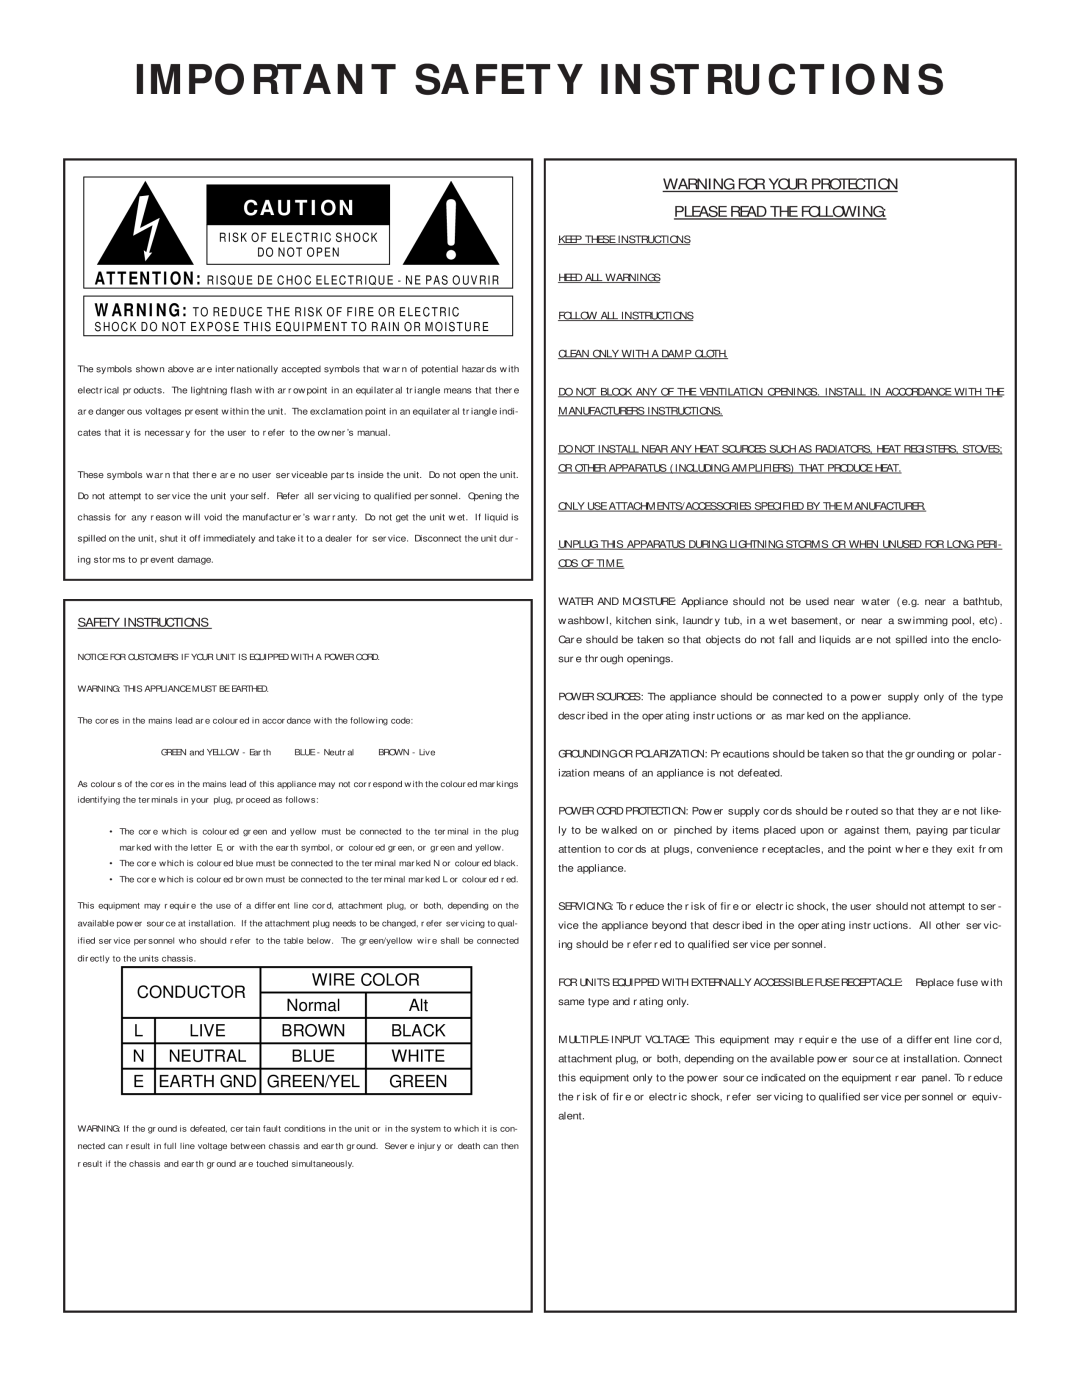 dbx Pro 376 Important Safety Instructions, Warning For Your Protection, Please Read The Following, C A U T I O N, Normal 